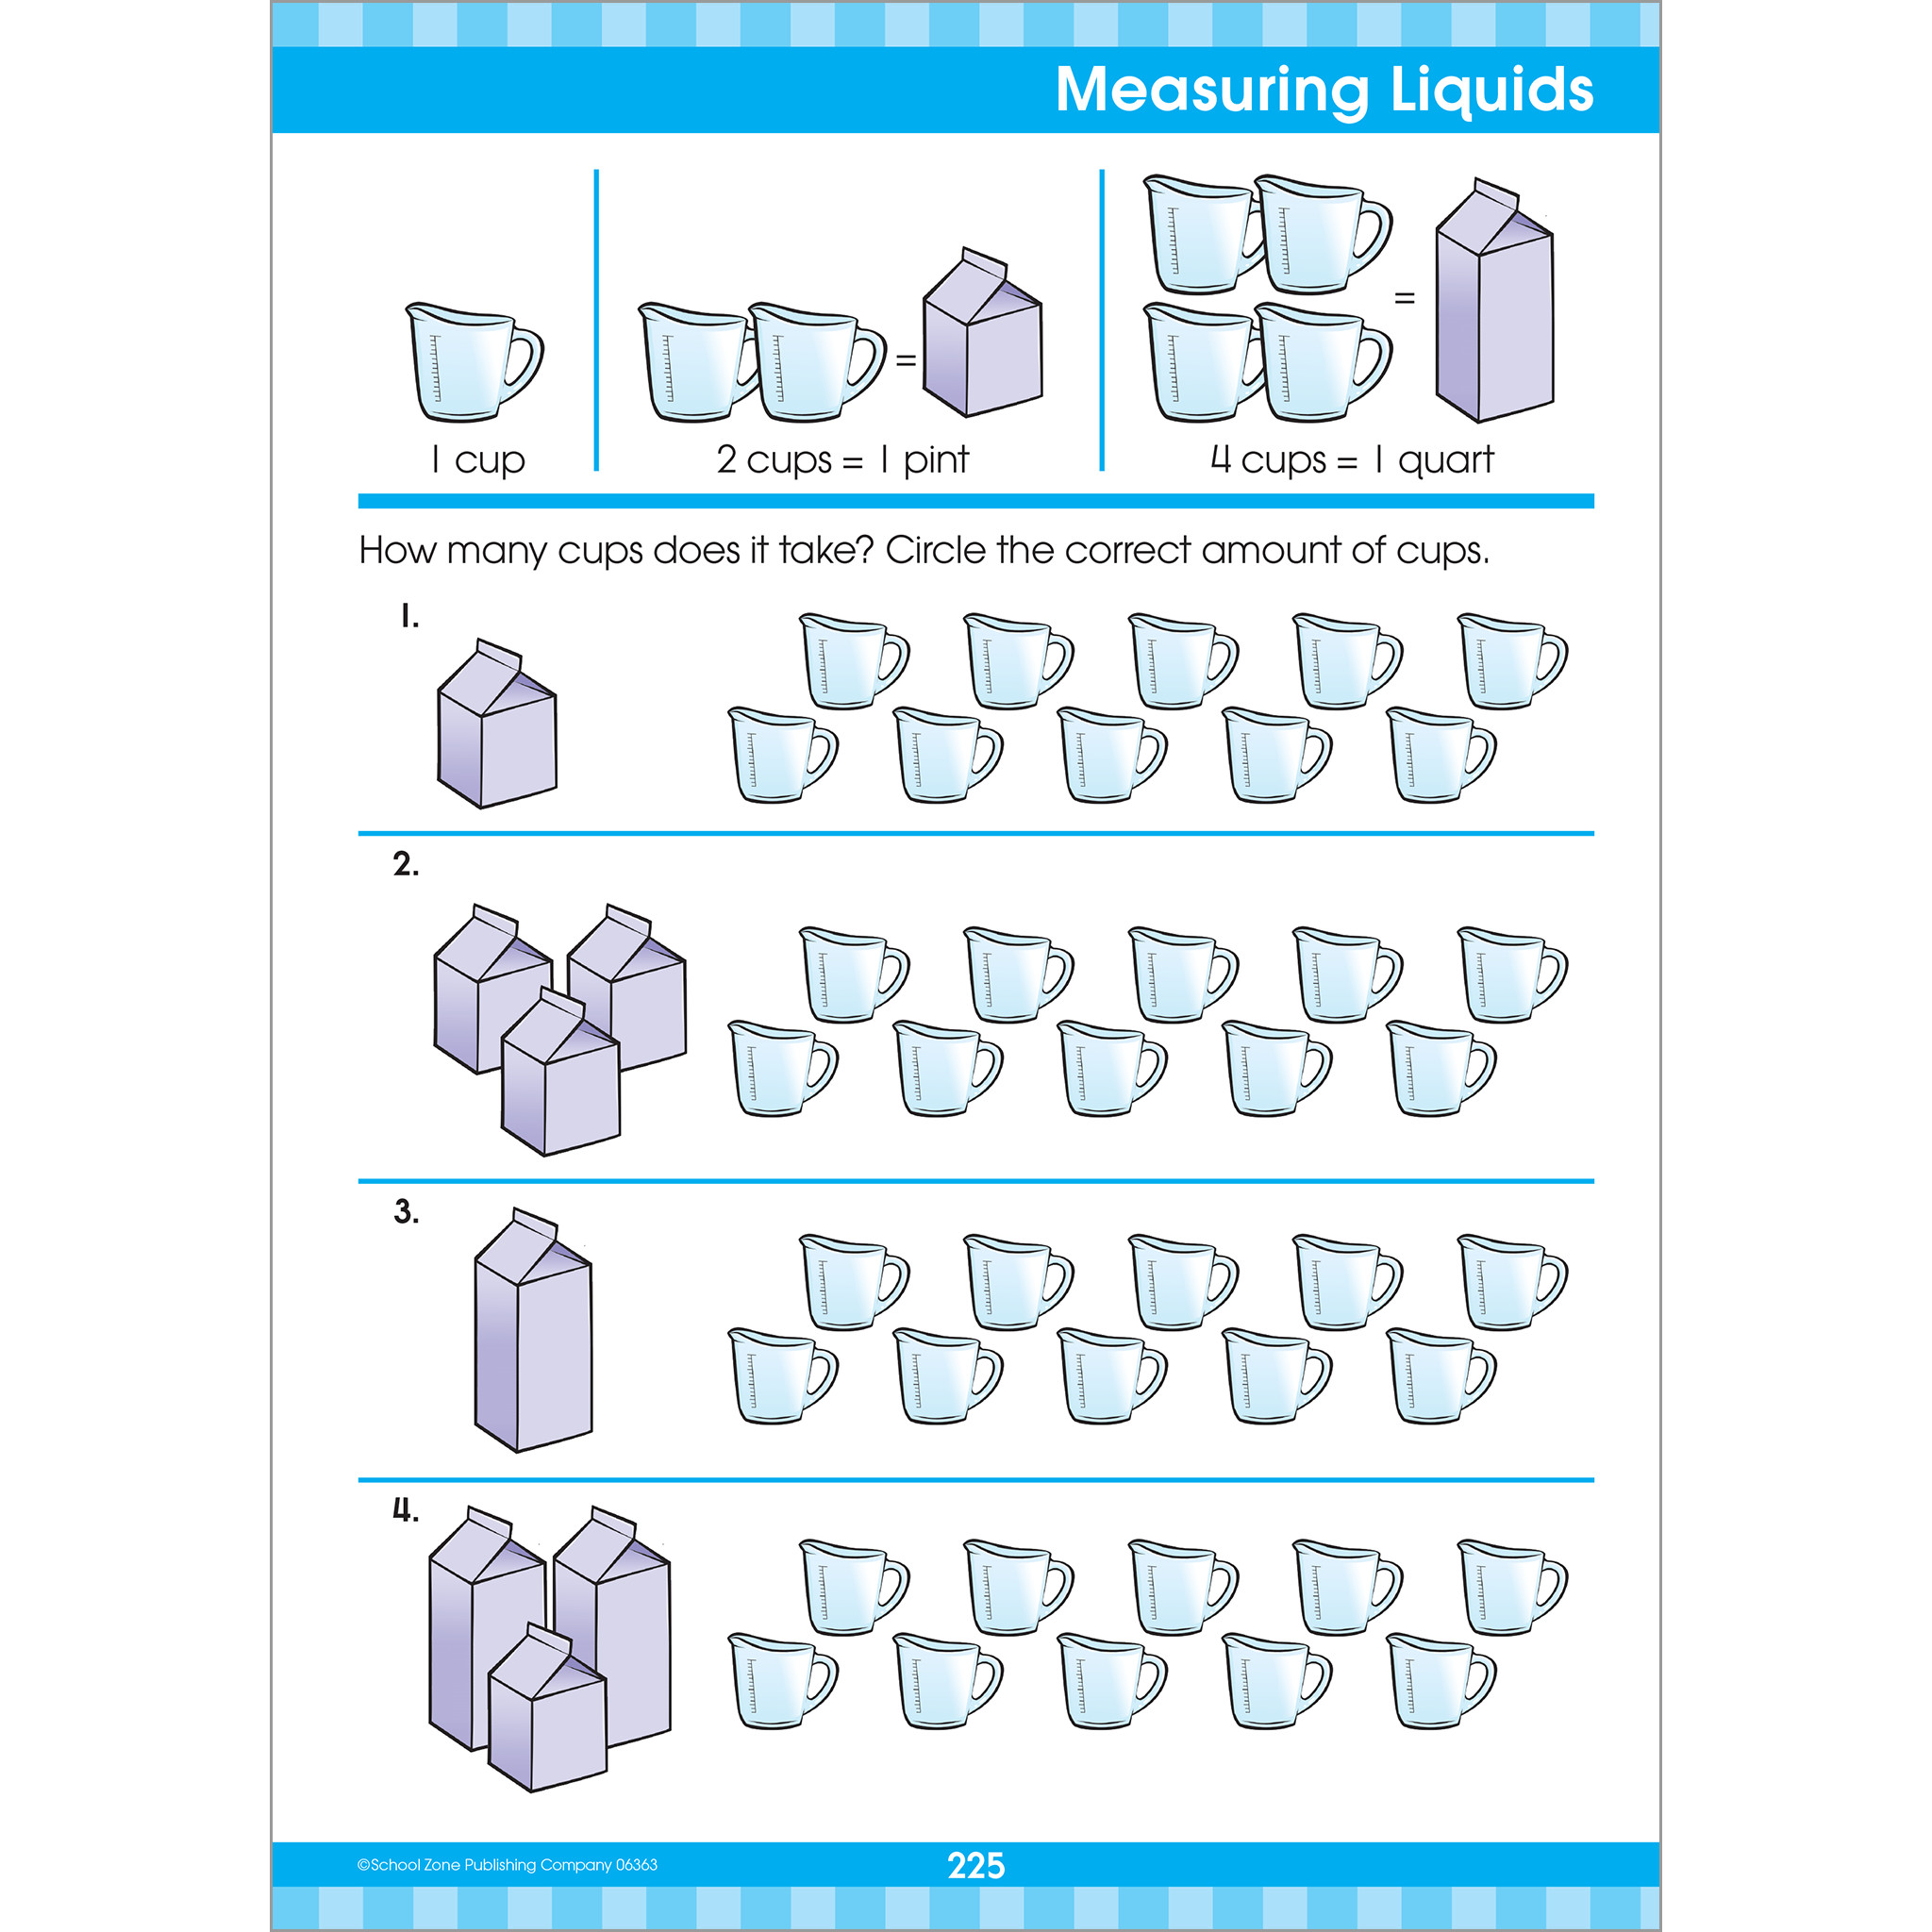 Free Math Worksheets Third Grade 3 Counting Money Counting Money Shopping Problems